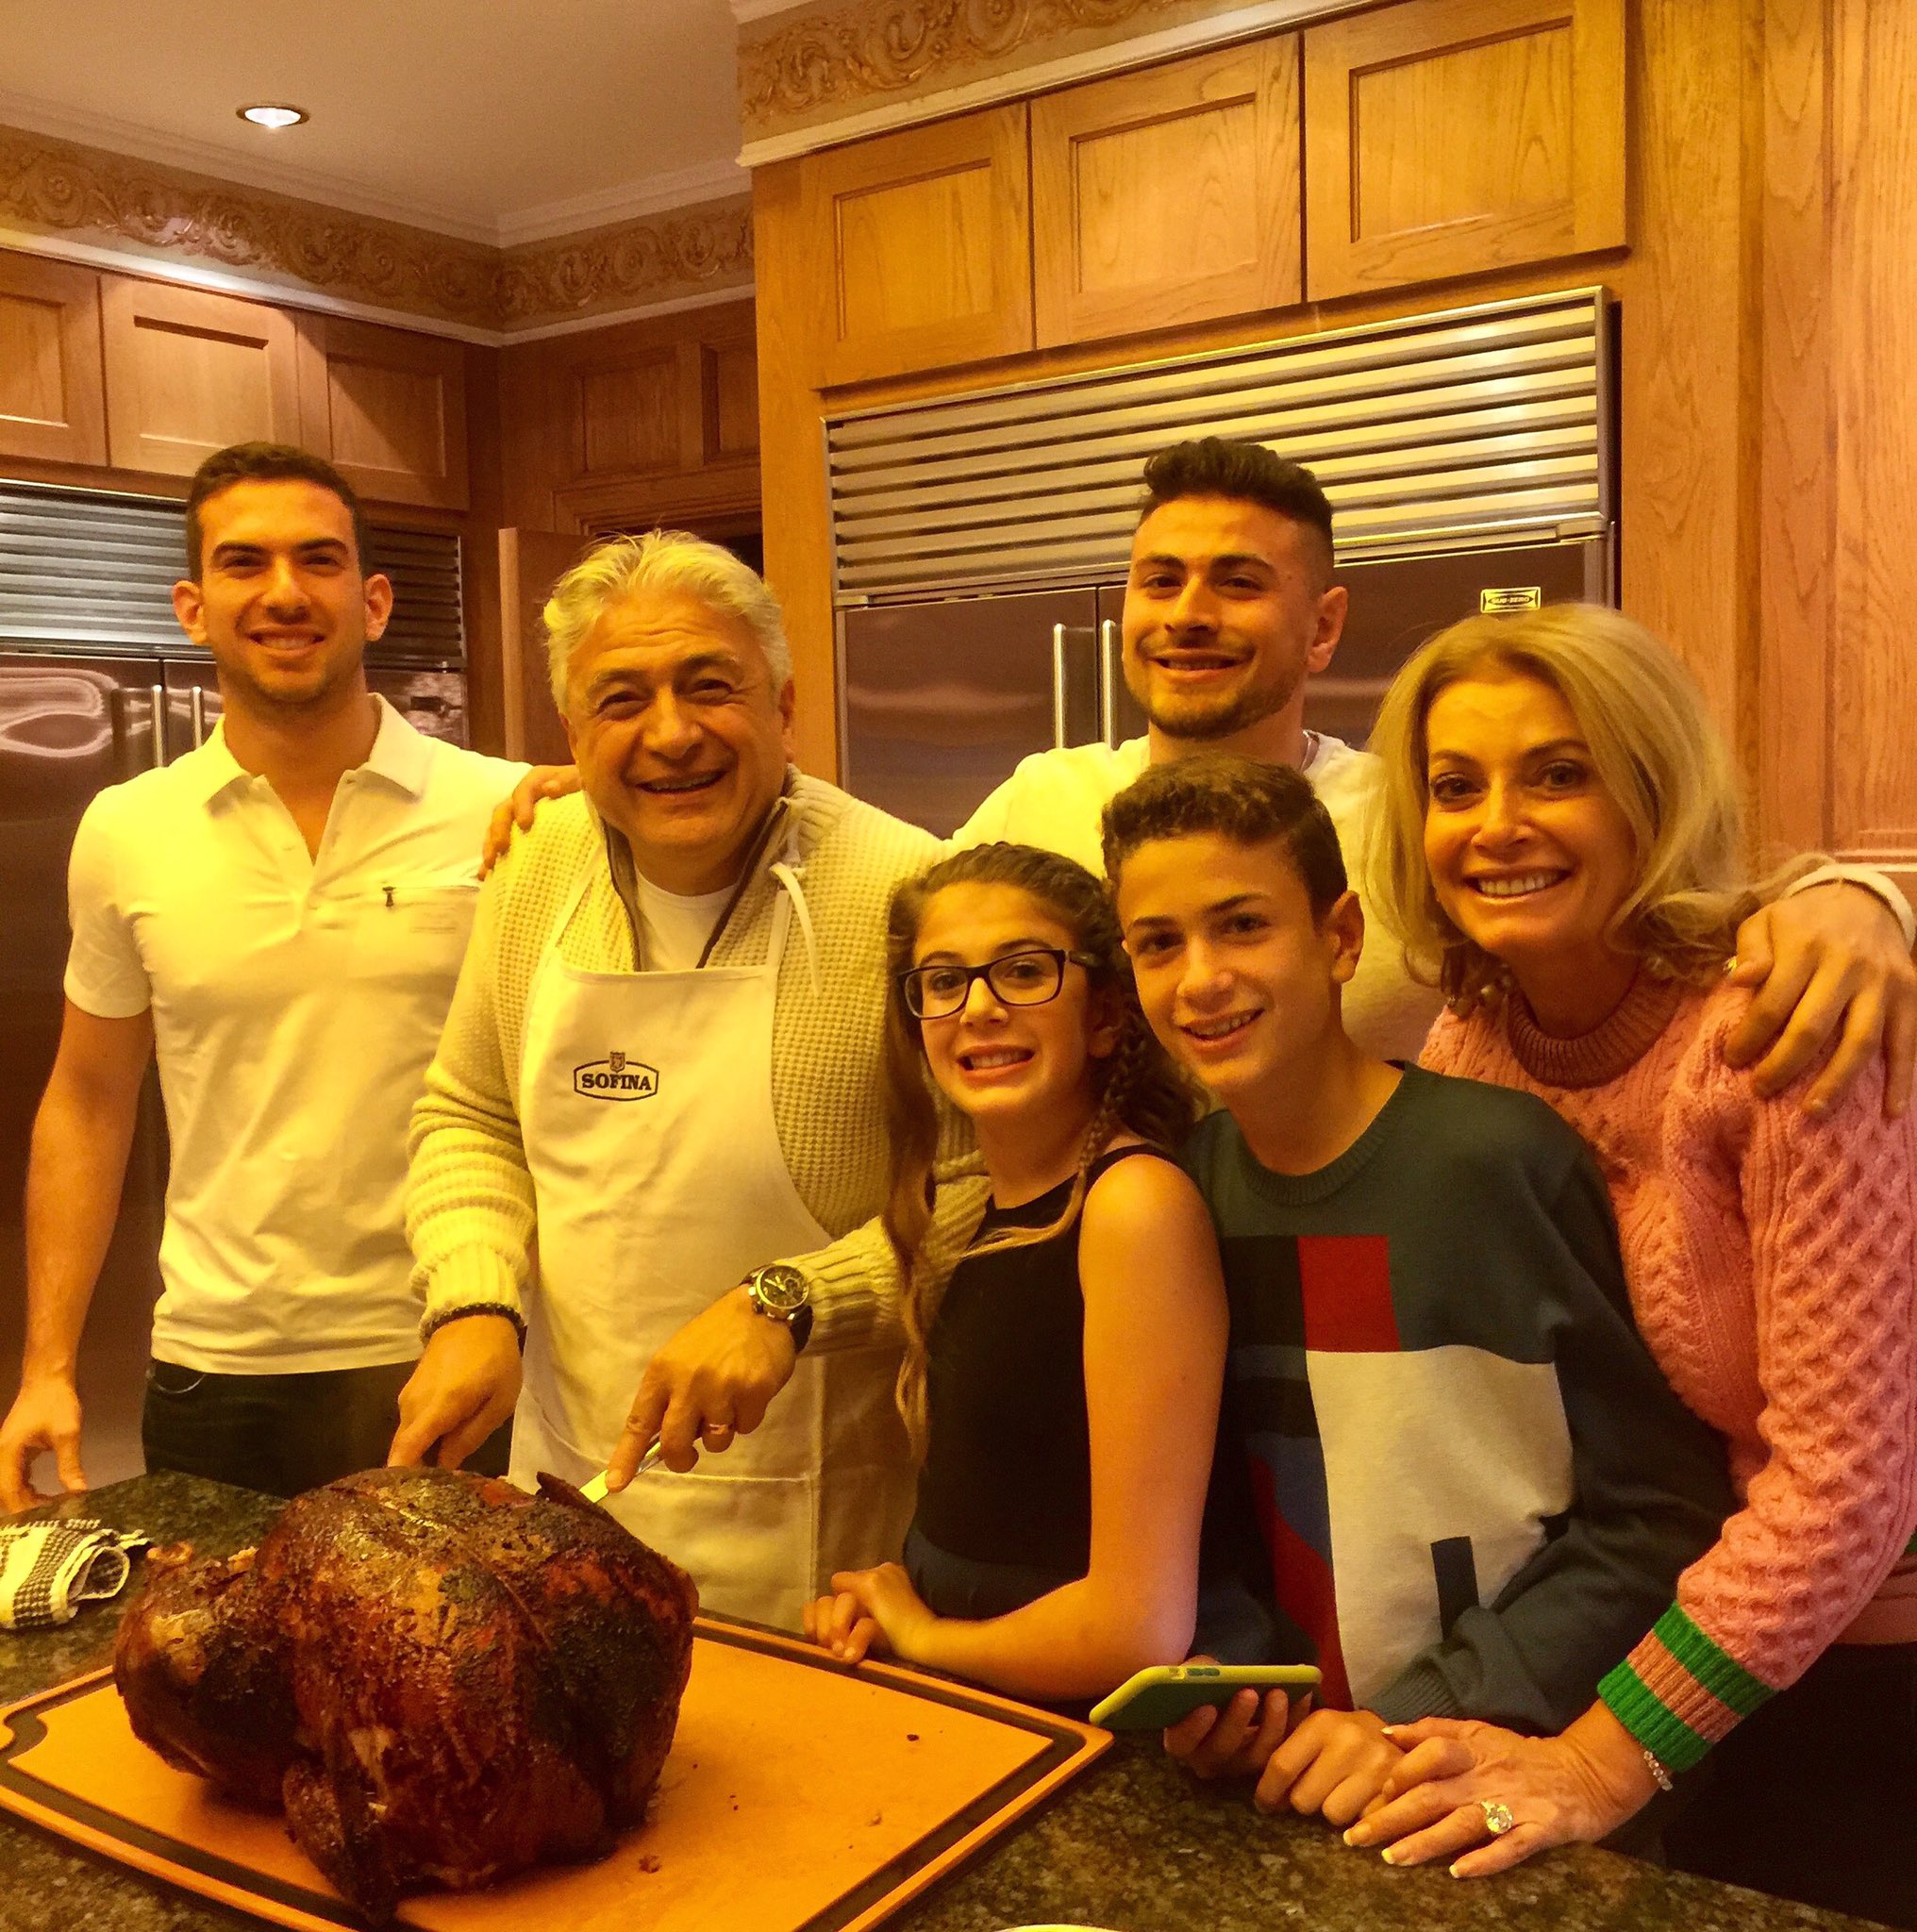 Nicholas Latifi on Twitter: "Happy thanksgiving from my family to yours!  First time in 5 years I'm actually home for it! 🦃😁🇨🇦  https://t.co/C90tV90DWZ" / Twitter